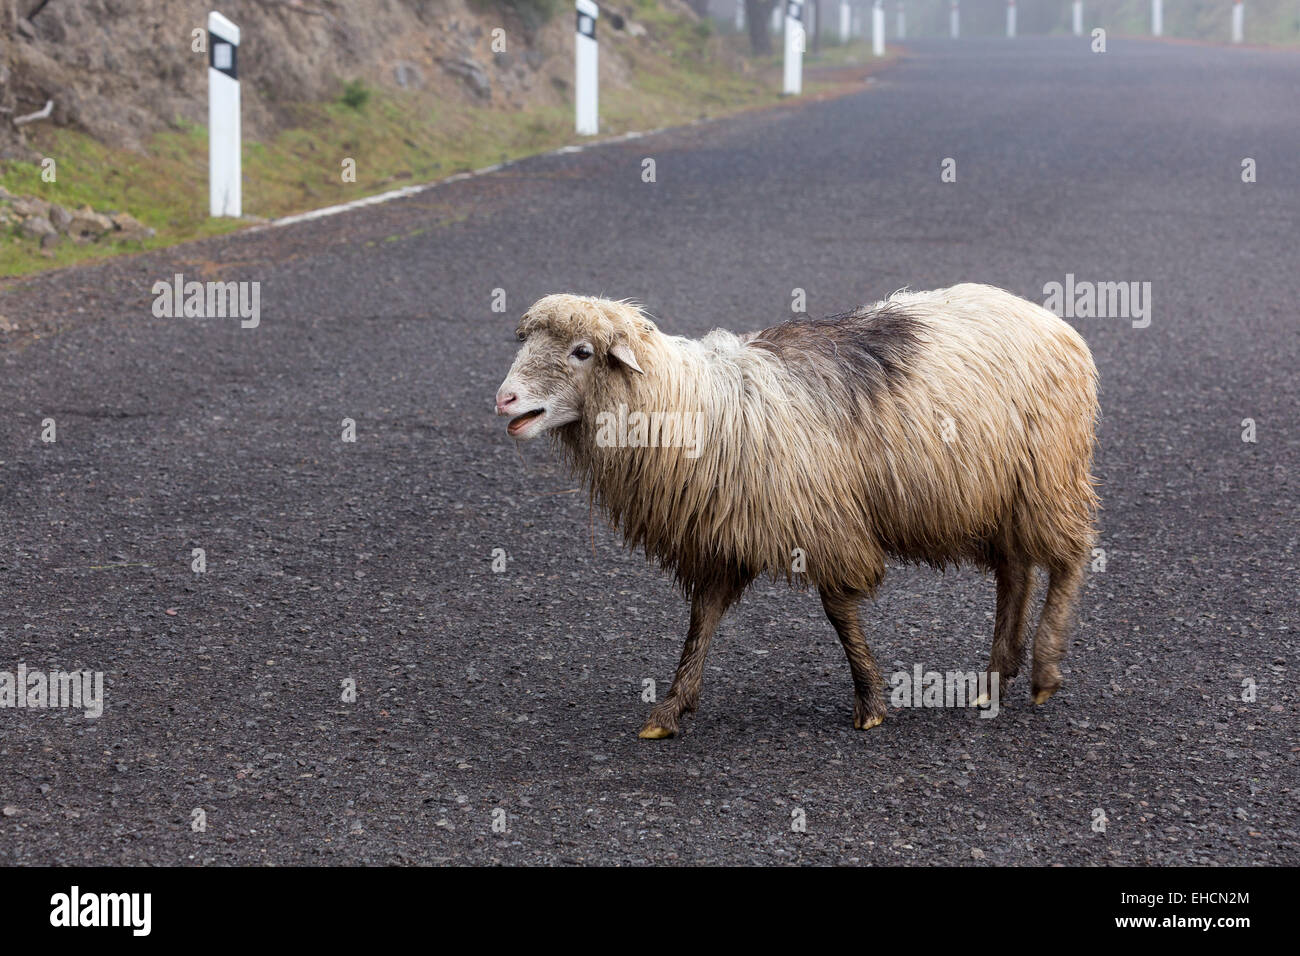 Sheep crossing a road, Gran Canaria, Canary Islands, Spain Stock Photo